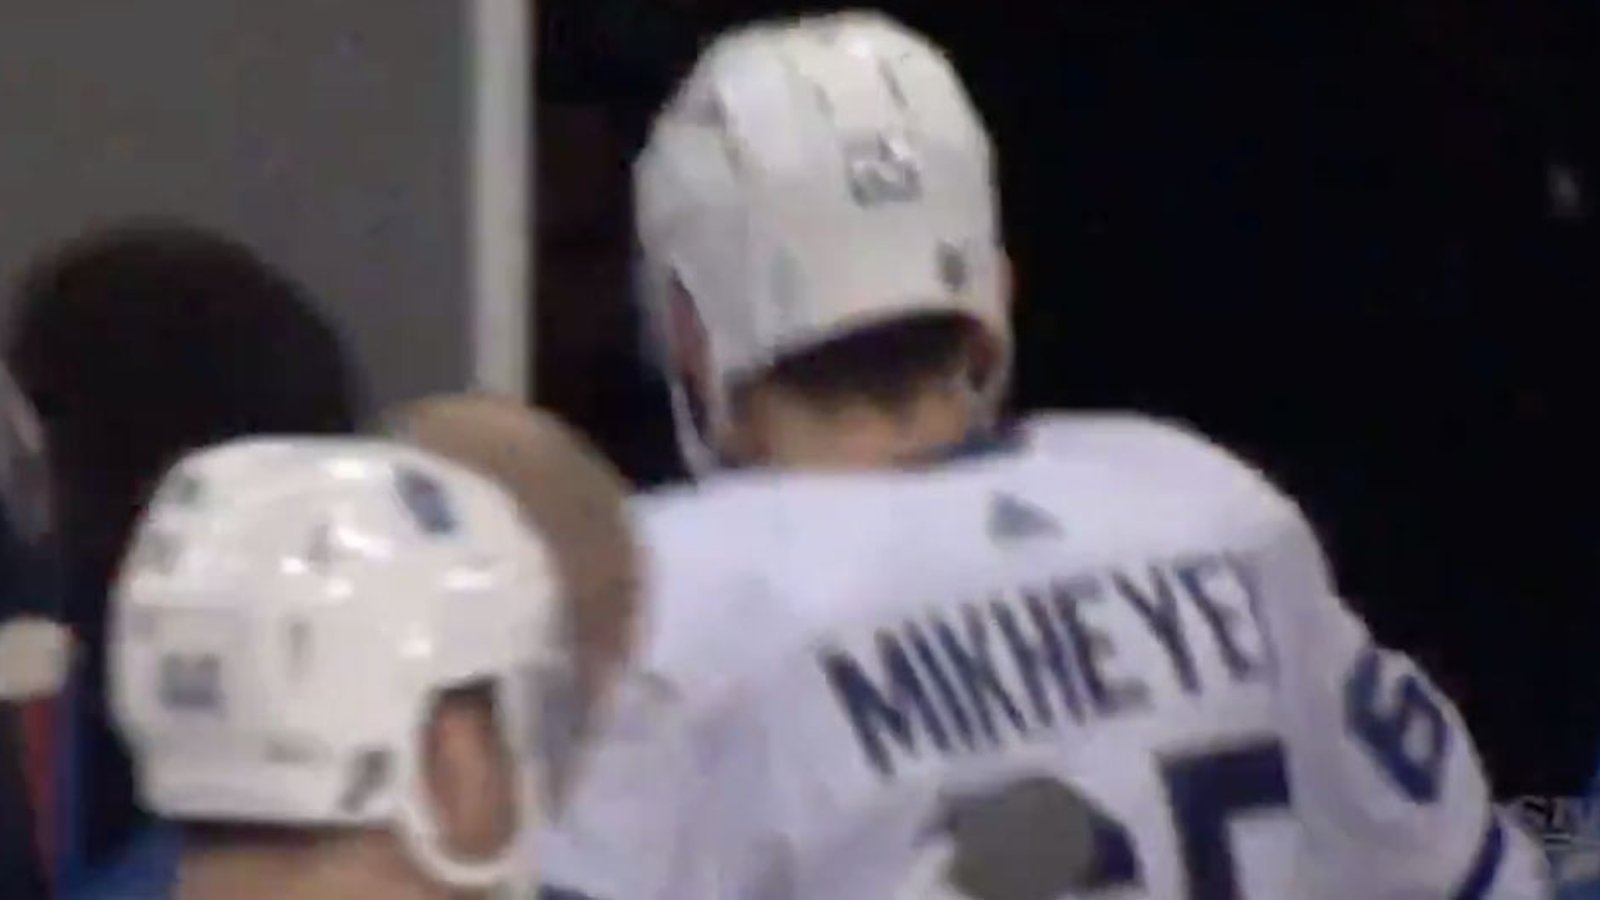 Leafs' Mikheyev rushes off the ice with severe bloody cut to wrist 